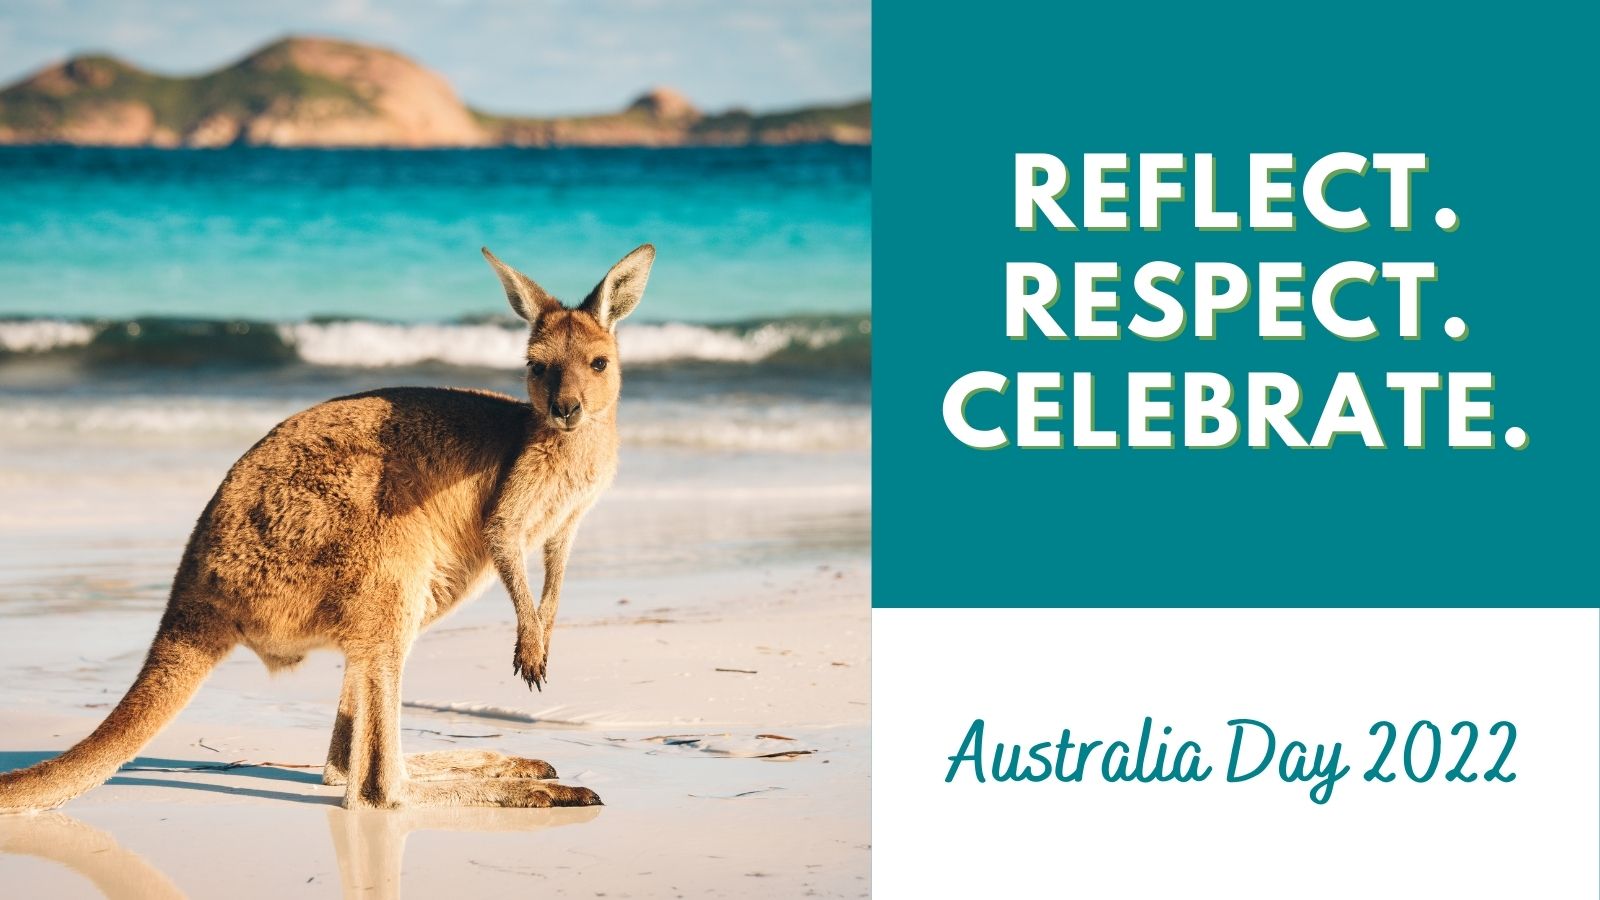 A kangaroo on a beach, with a banner \\\\\\\\\\\\\\\\\\\\\\\\\'Reflect. Respect. Celebrate"